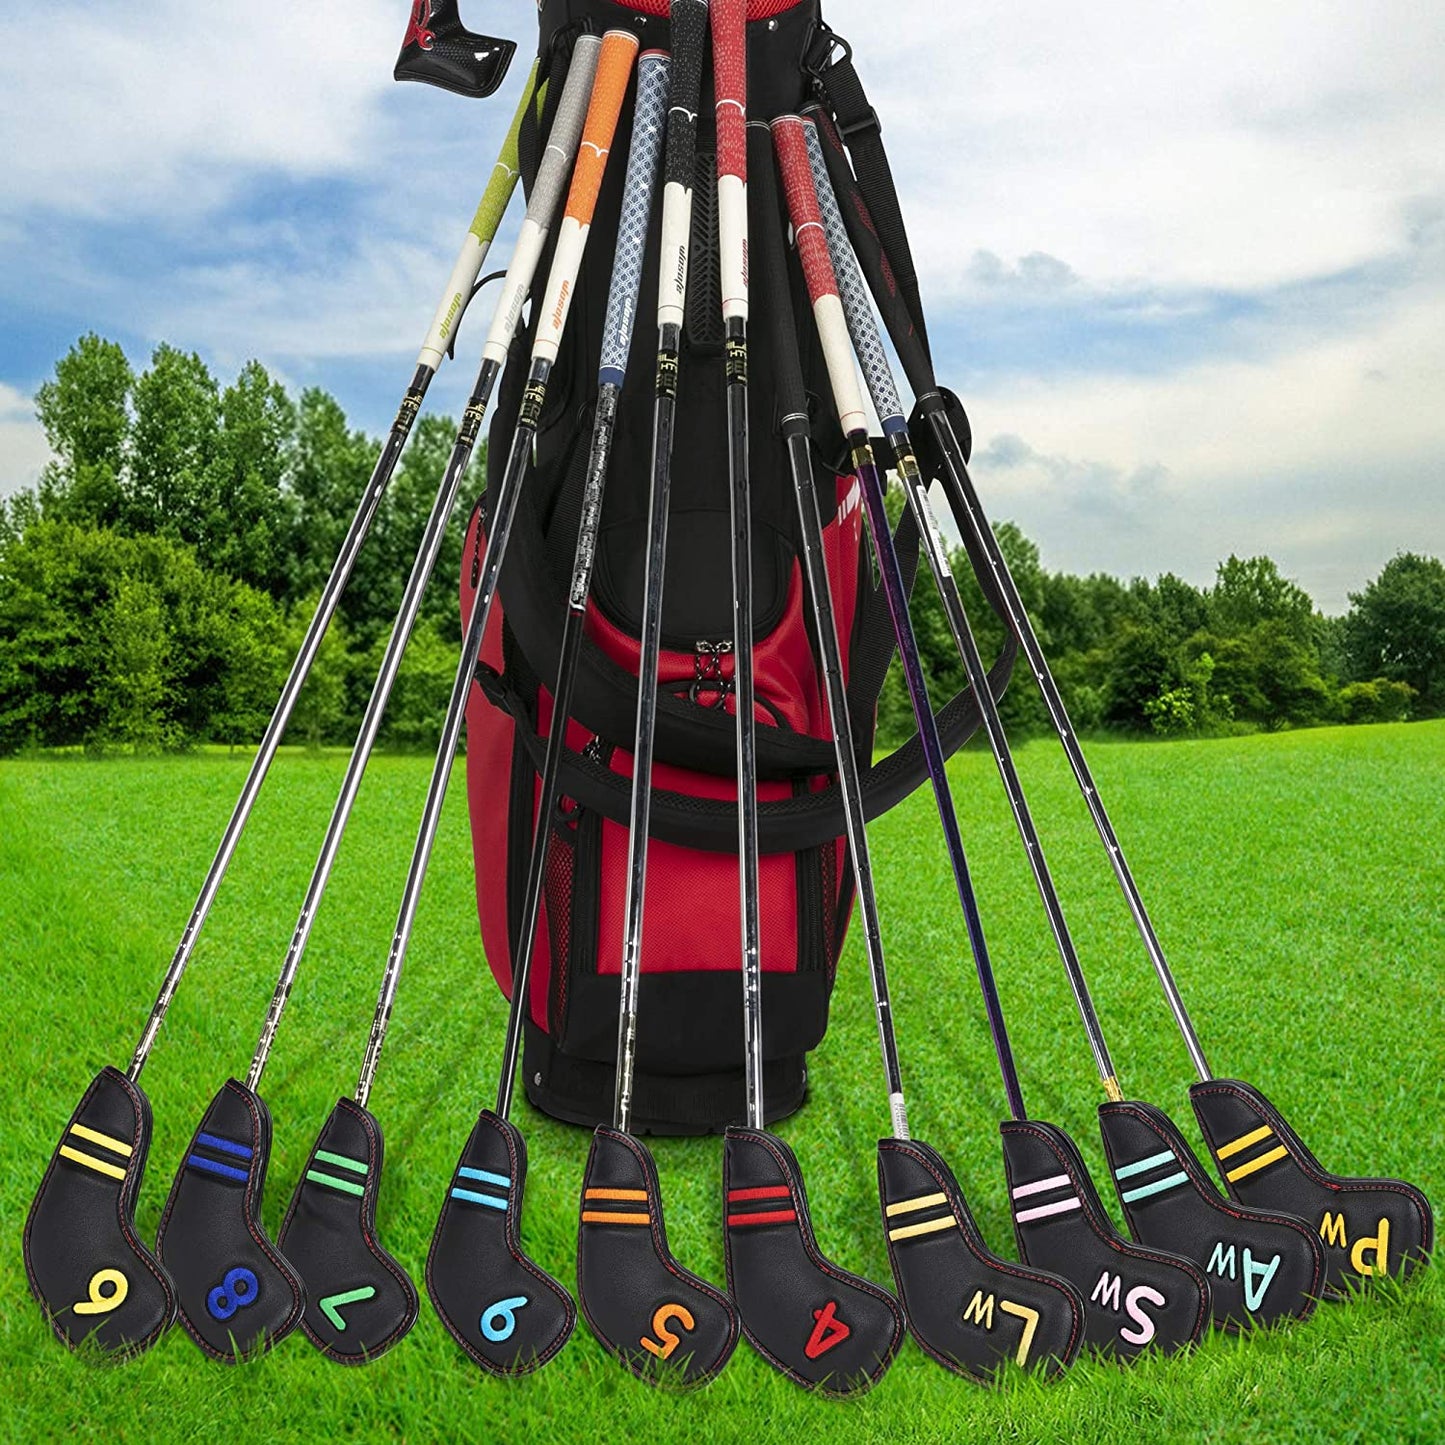 wosofe Golf Iron Covers Black Leather Head Covers Headcover 11pcs Set （4 5 6 7 8 9 Pw Aw Sw Lw X Colorful Number Embroideried PU Leather Waterproof Fit All Brands